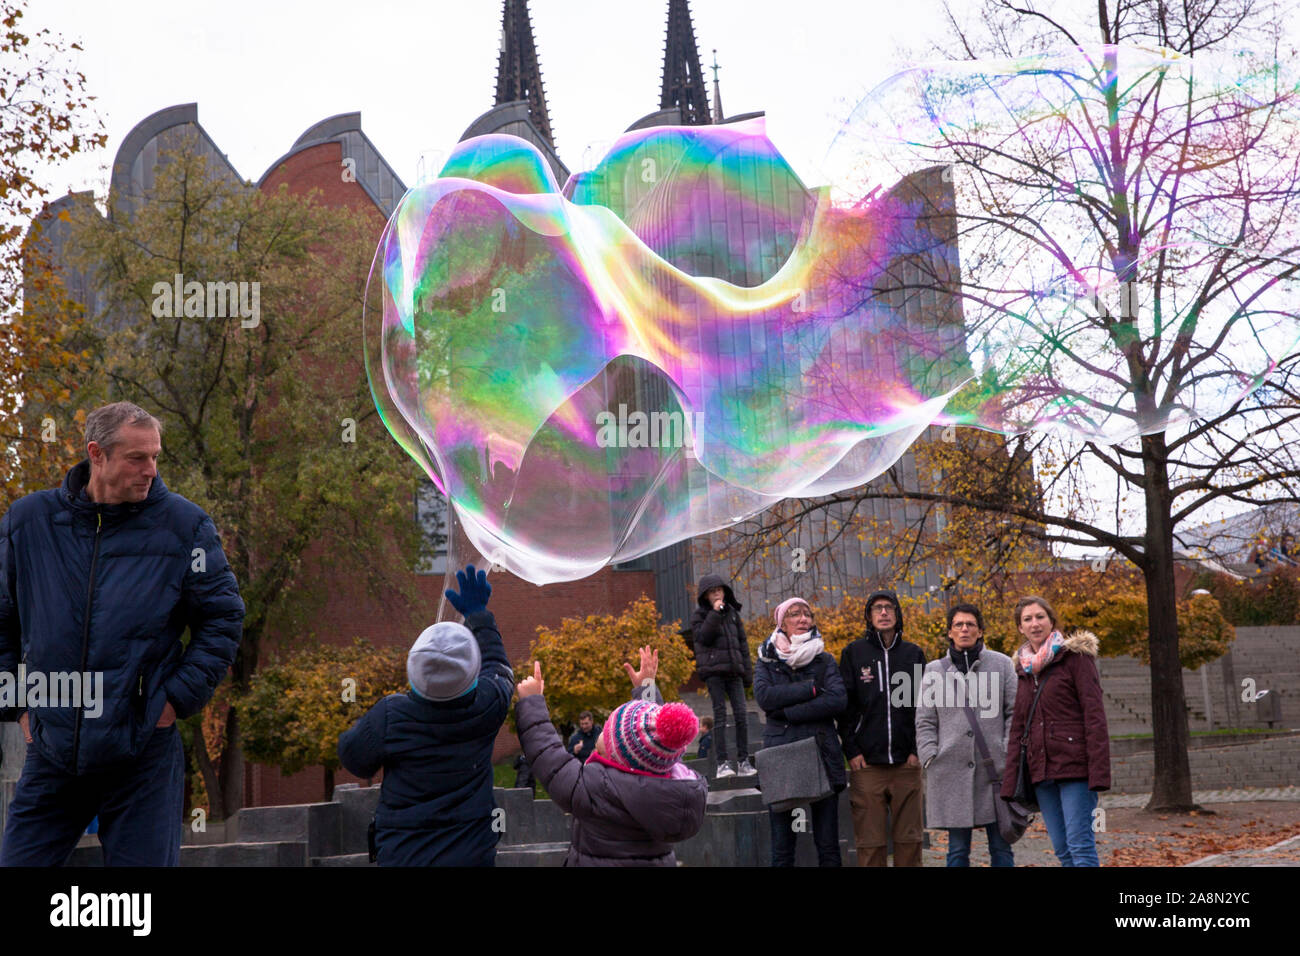 man makes huge soap bubbles at the Rhine garden in the old part of the town, Cologne, Germany.  Mann macht grosse Seifenblasen im Rheingarten in der A Stock Photo